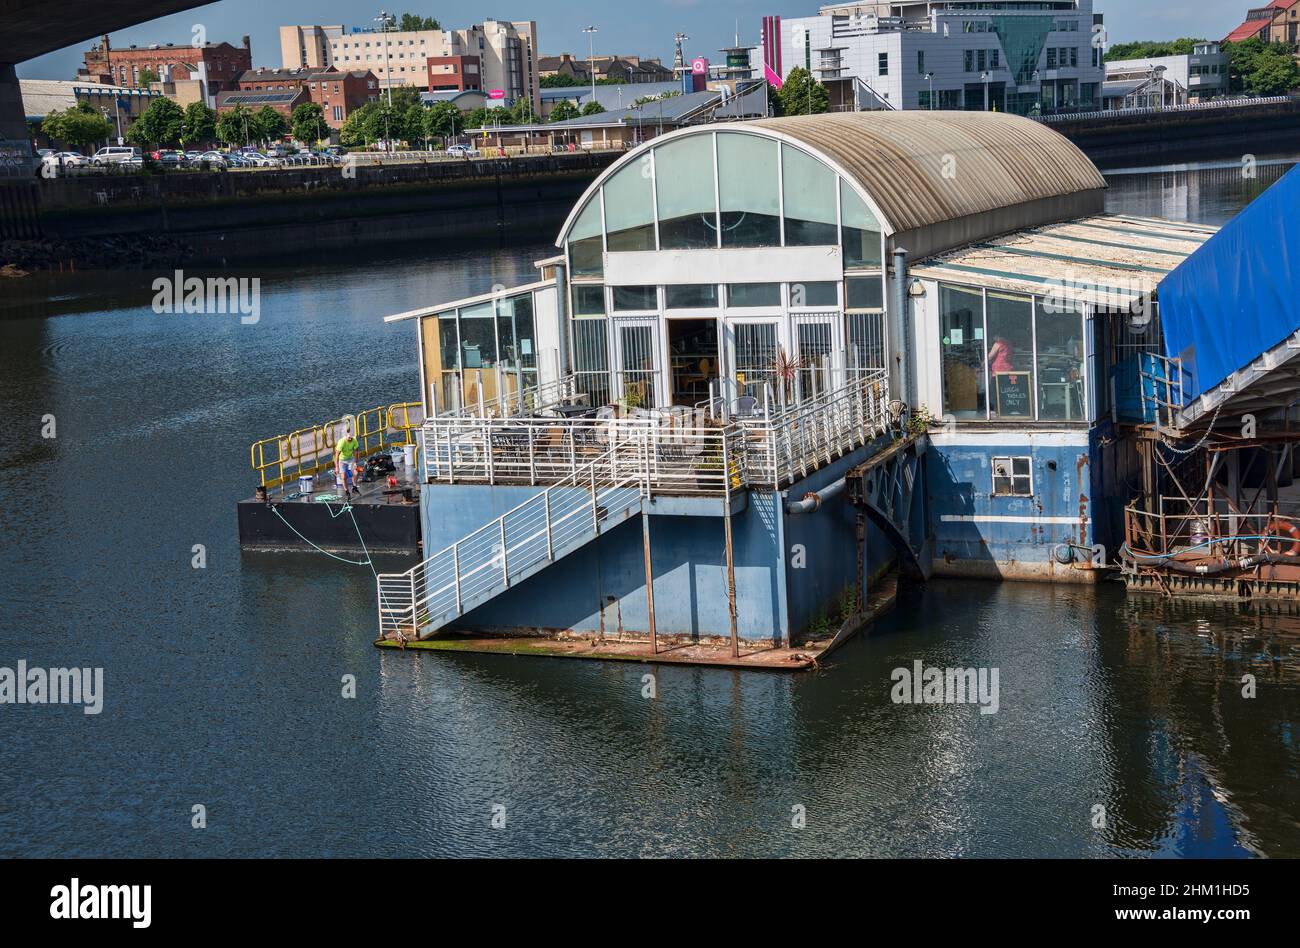 The Ferry entertainment venue moored on the River clyde in Glasgow Scotland Stock Photo